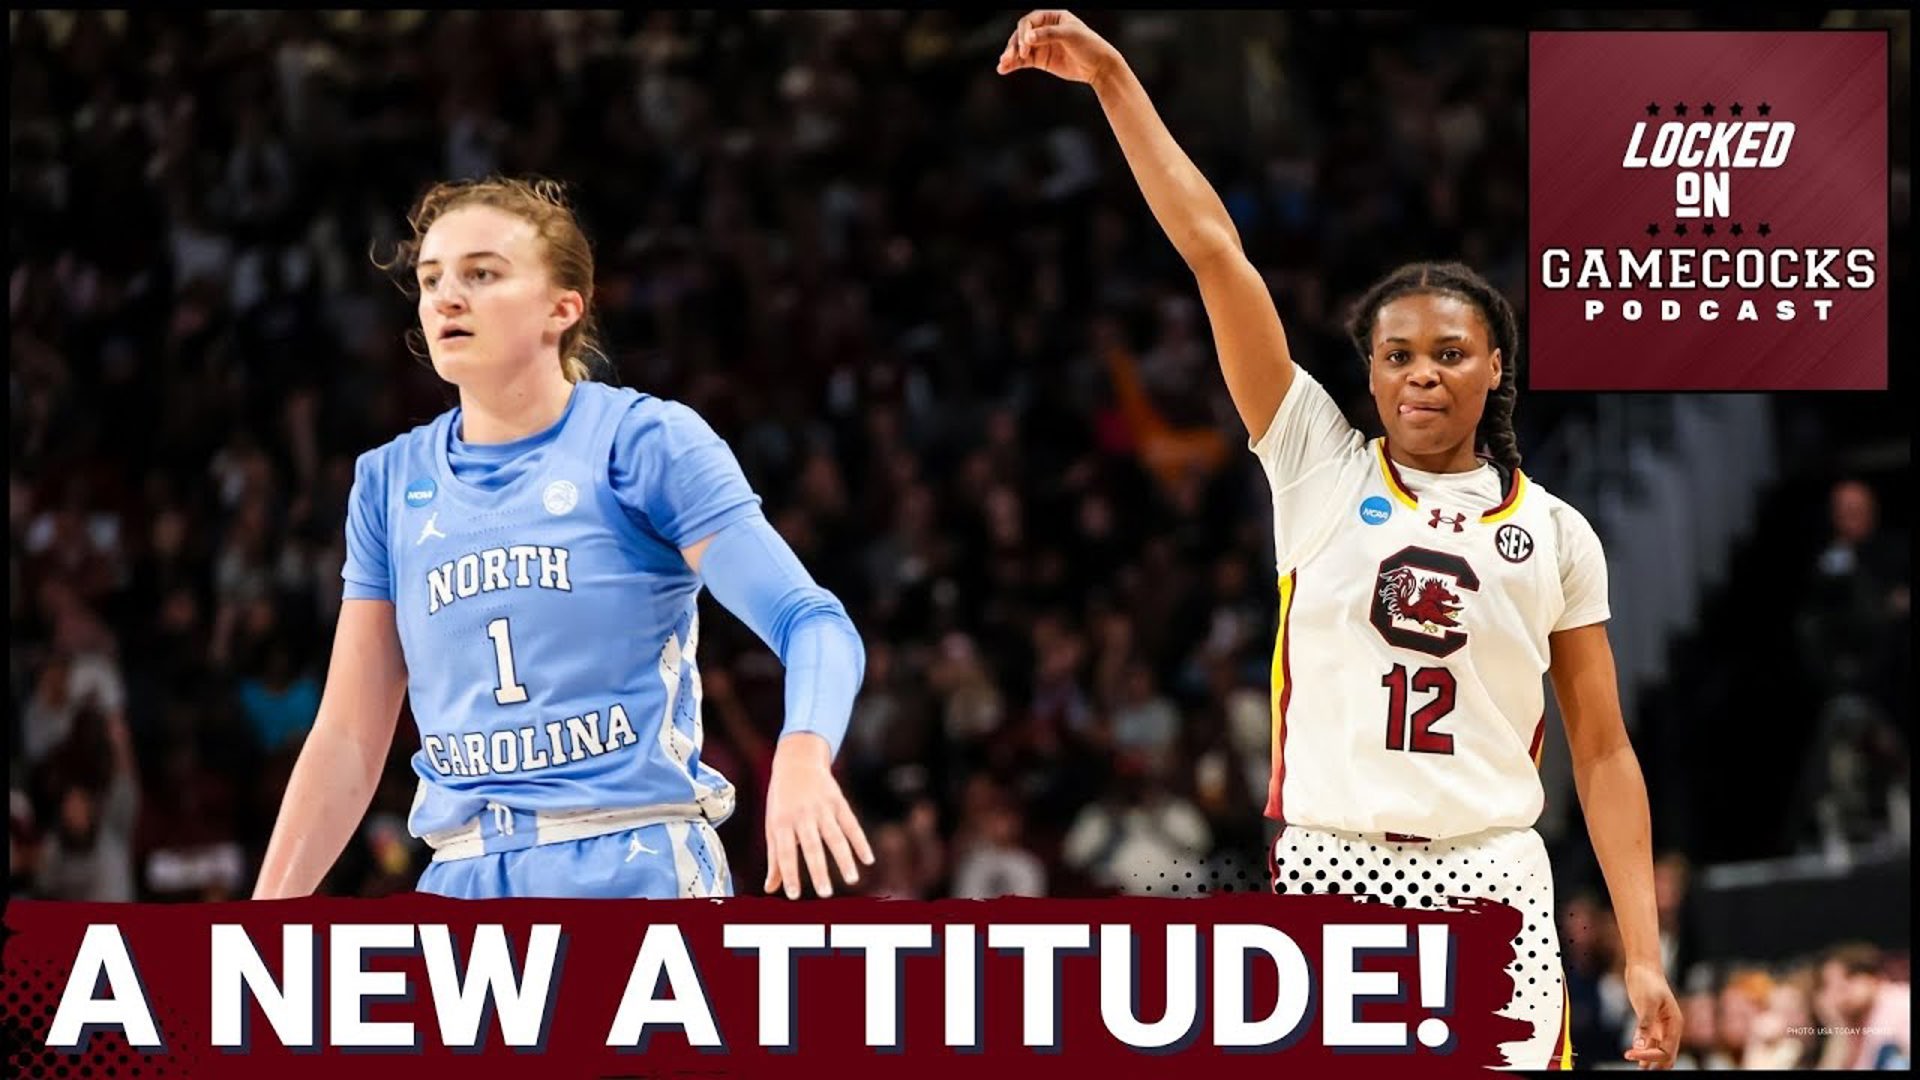 MiLaysia Fulwiley’s New Mentality Could Have A Positive Impact On South Carolina Women’s Basketball!